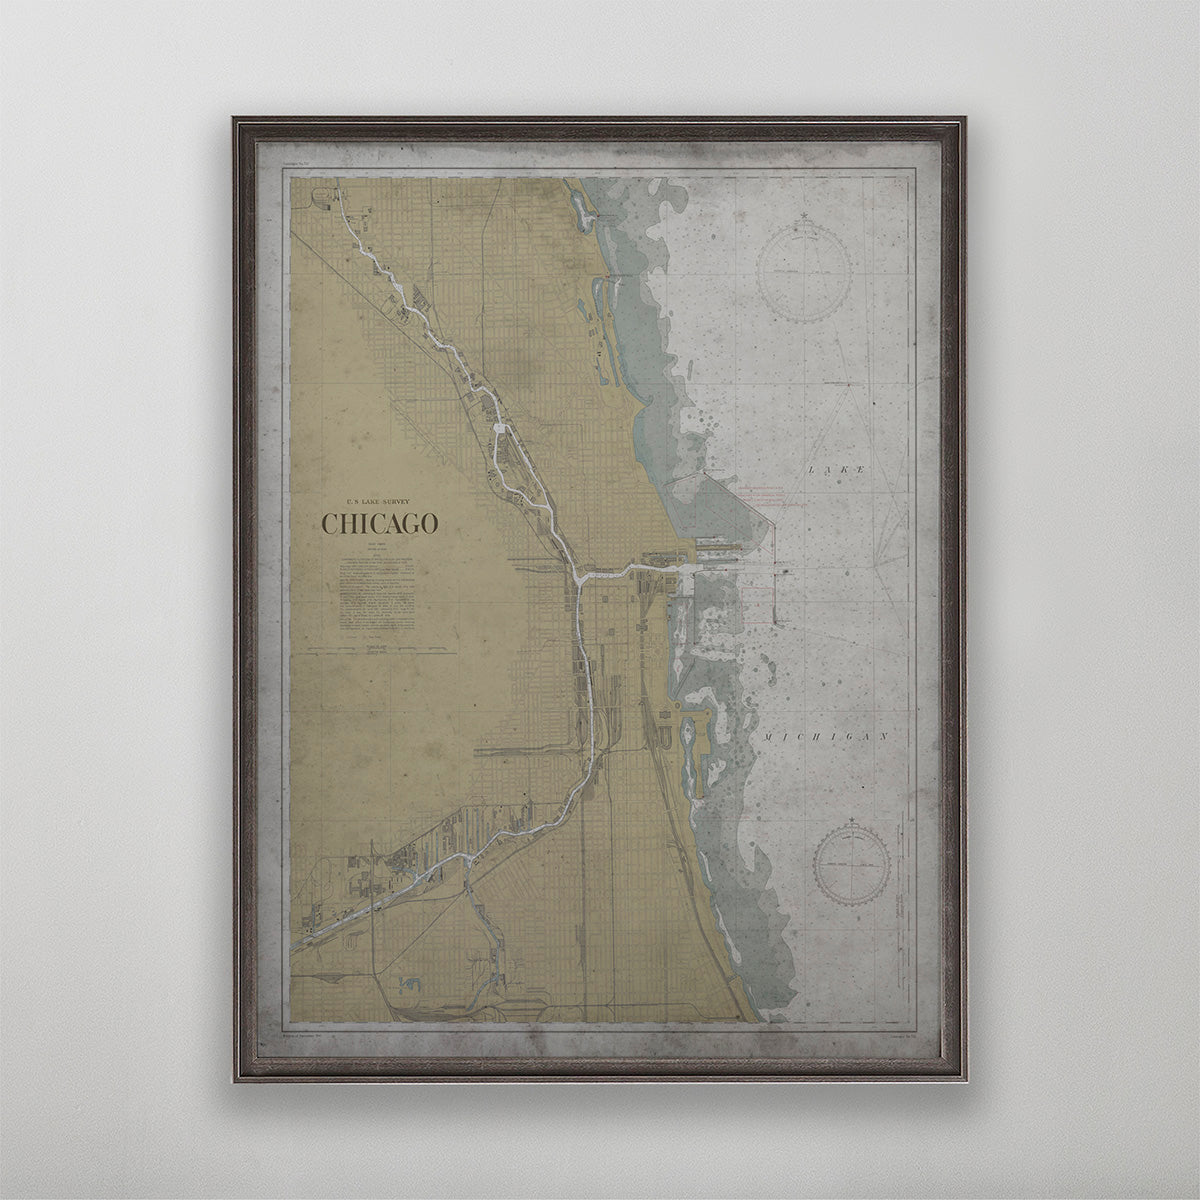 Old vintage historic nautical chart of Chicago, Illinois for wall art home decor. 